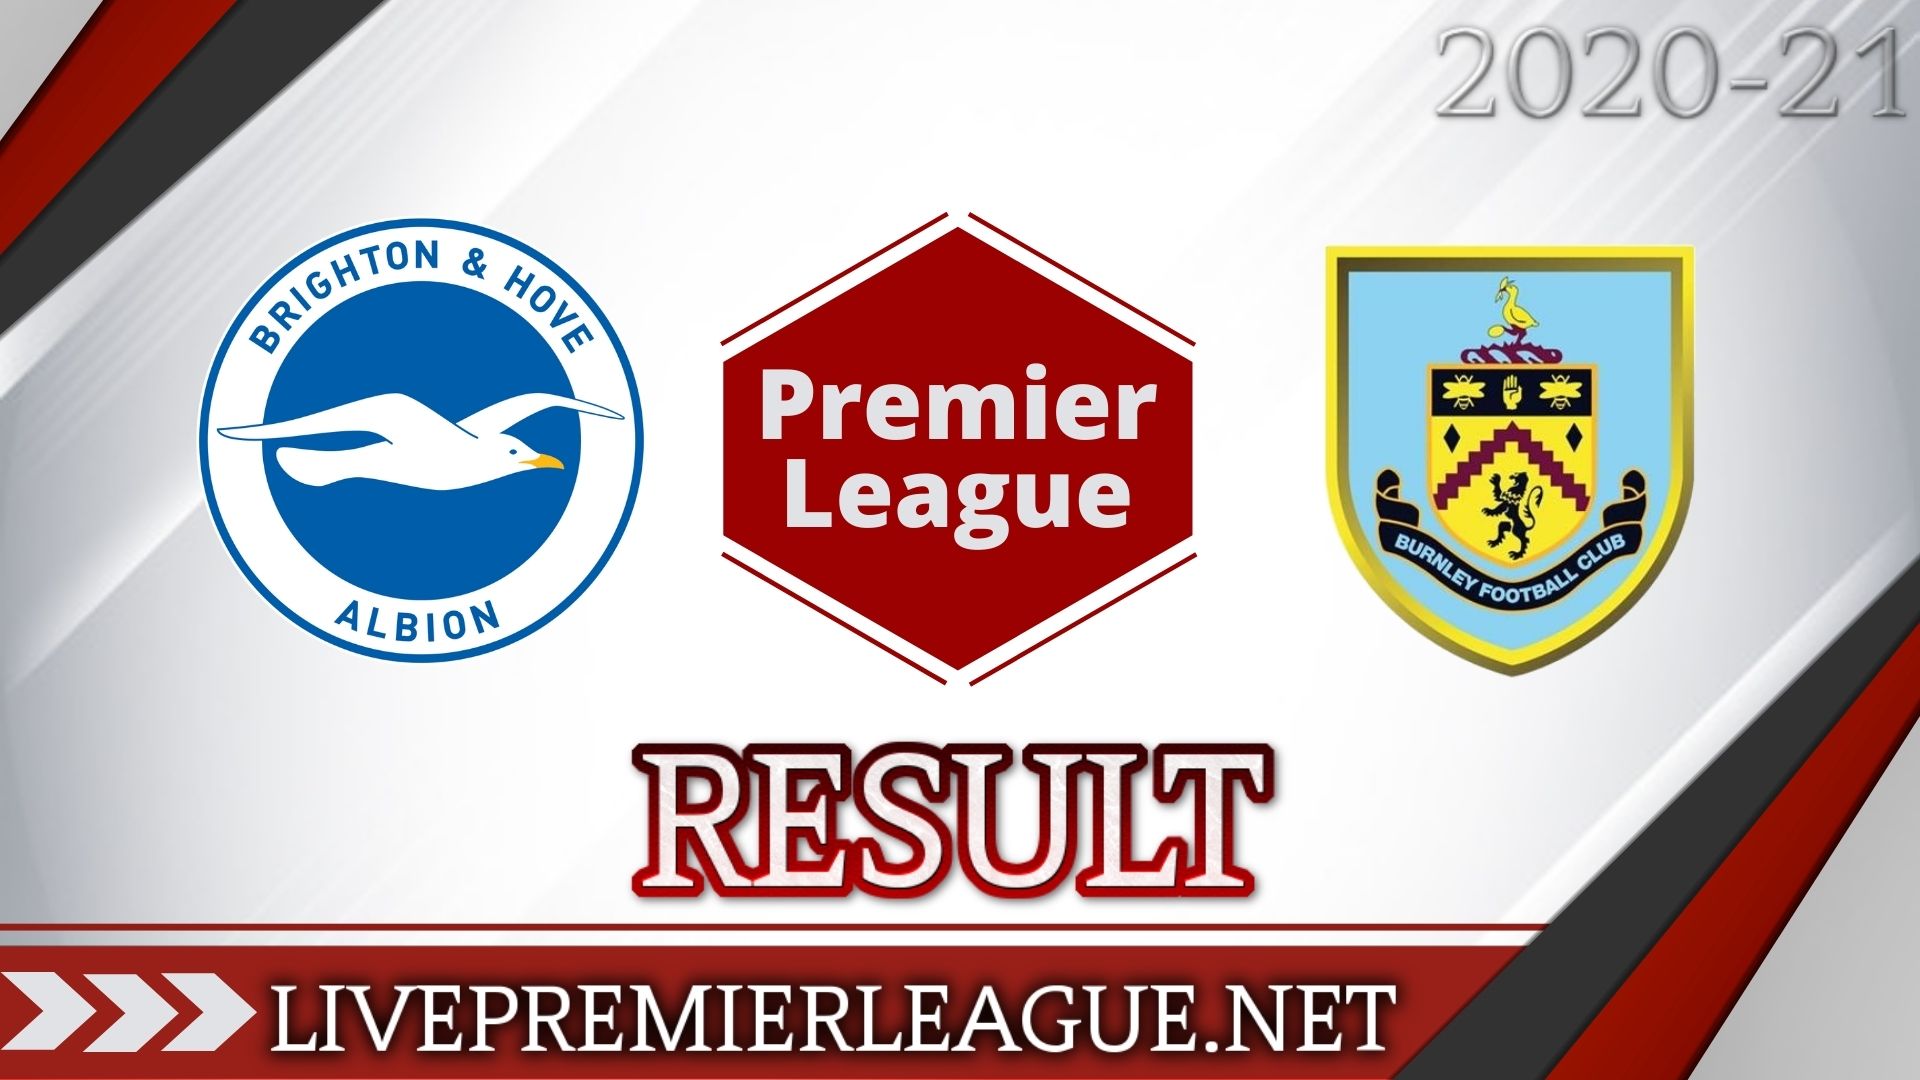 Brighton and Hove Albion Vs Burnley | Week 8 Result 2020